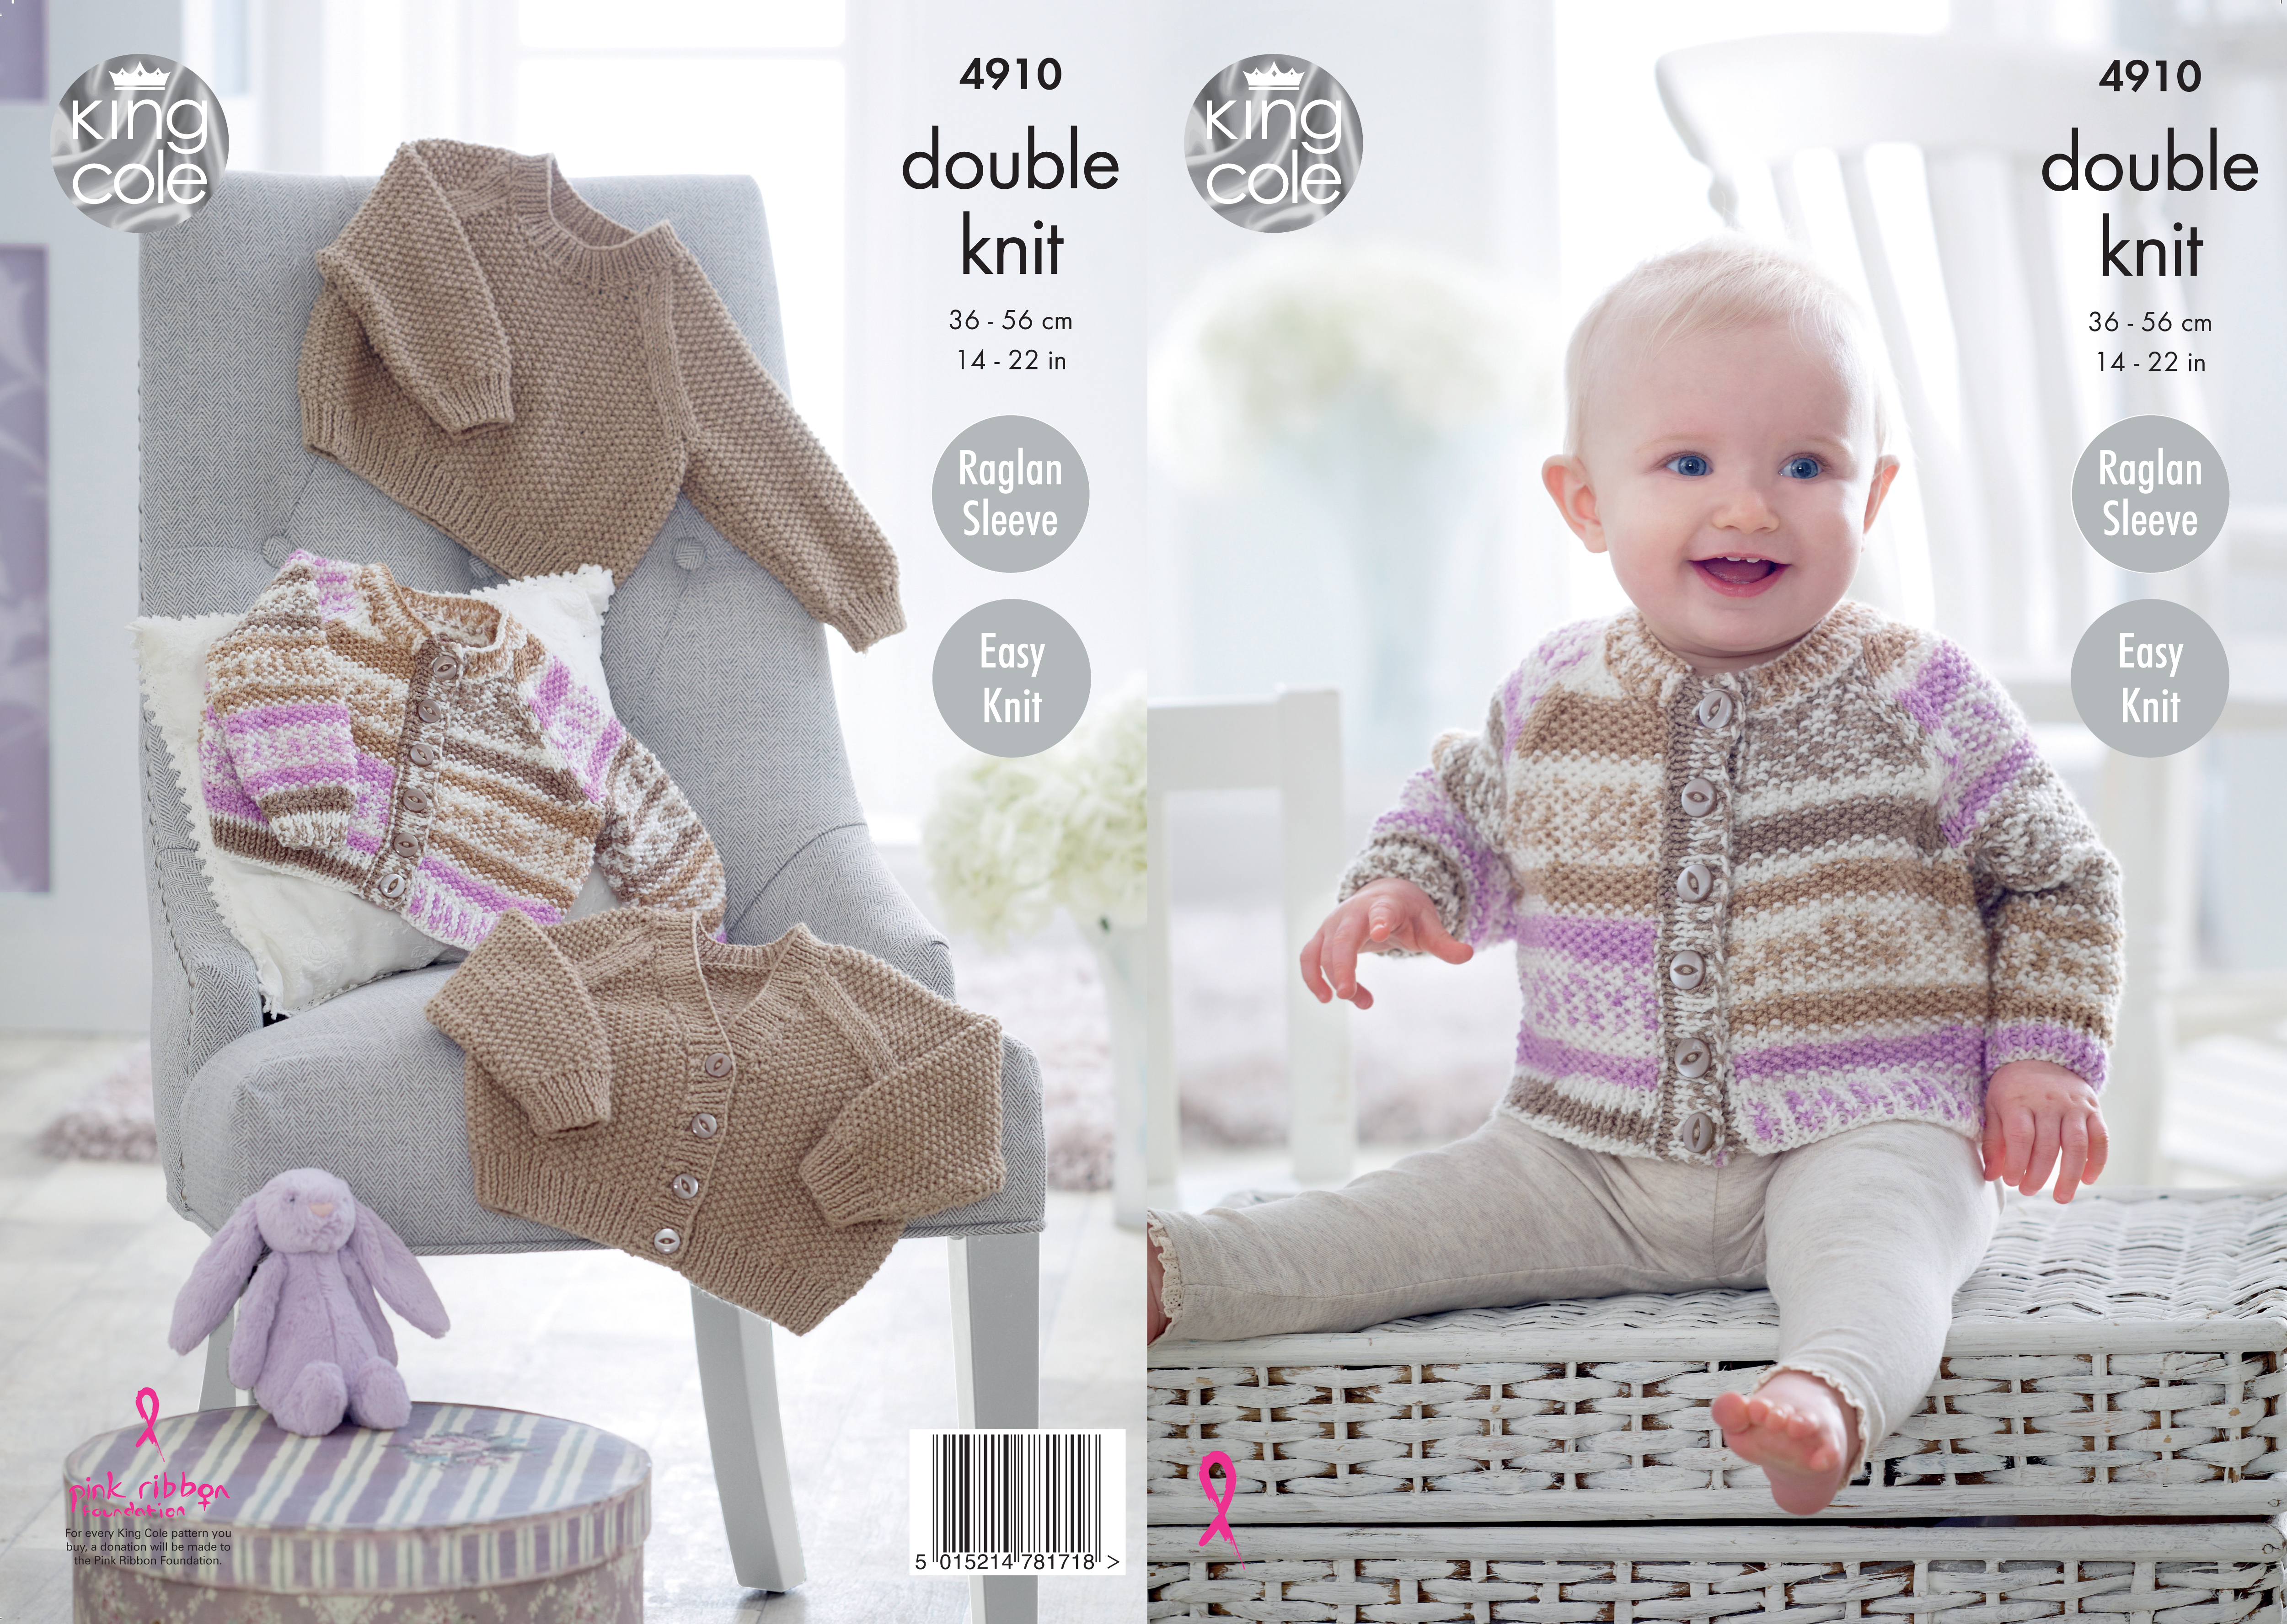 Baby Knitting Patterns Easy Details About Knitting Pattern Ba Easy Knit Raglan Cardigans Sweater In Moss St Dk 4910